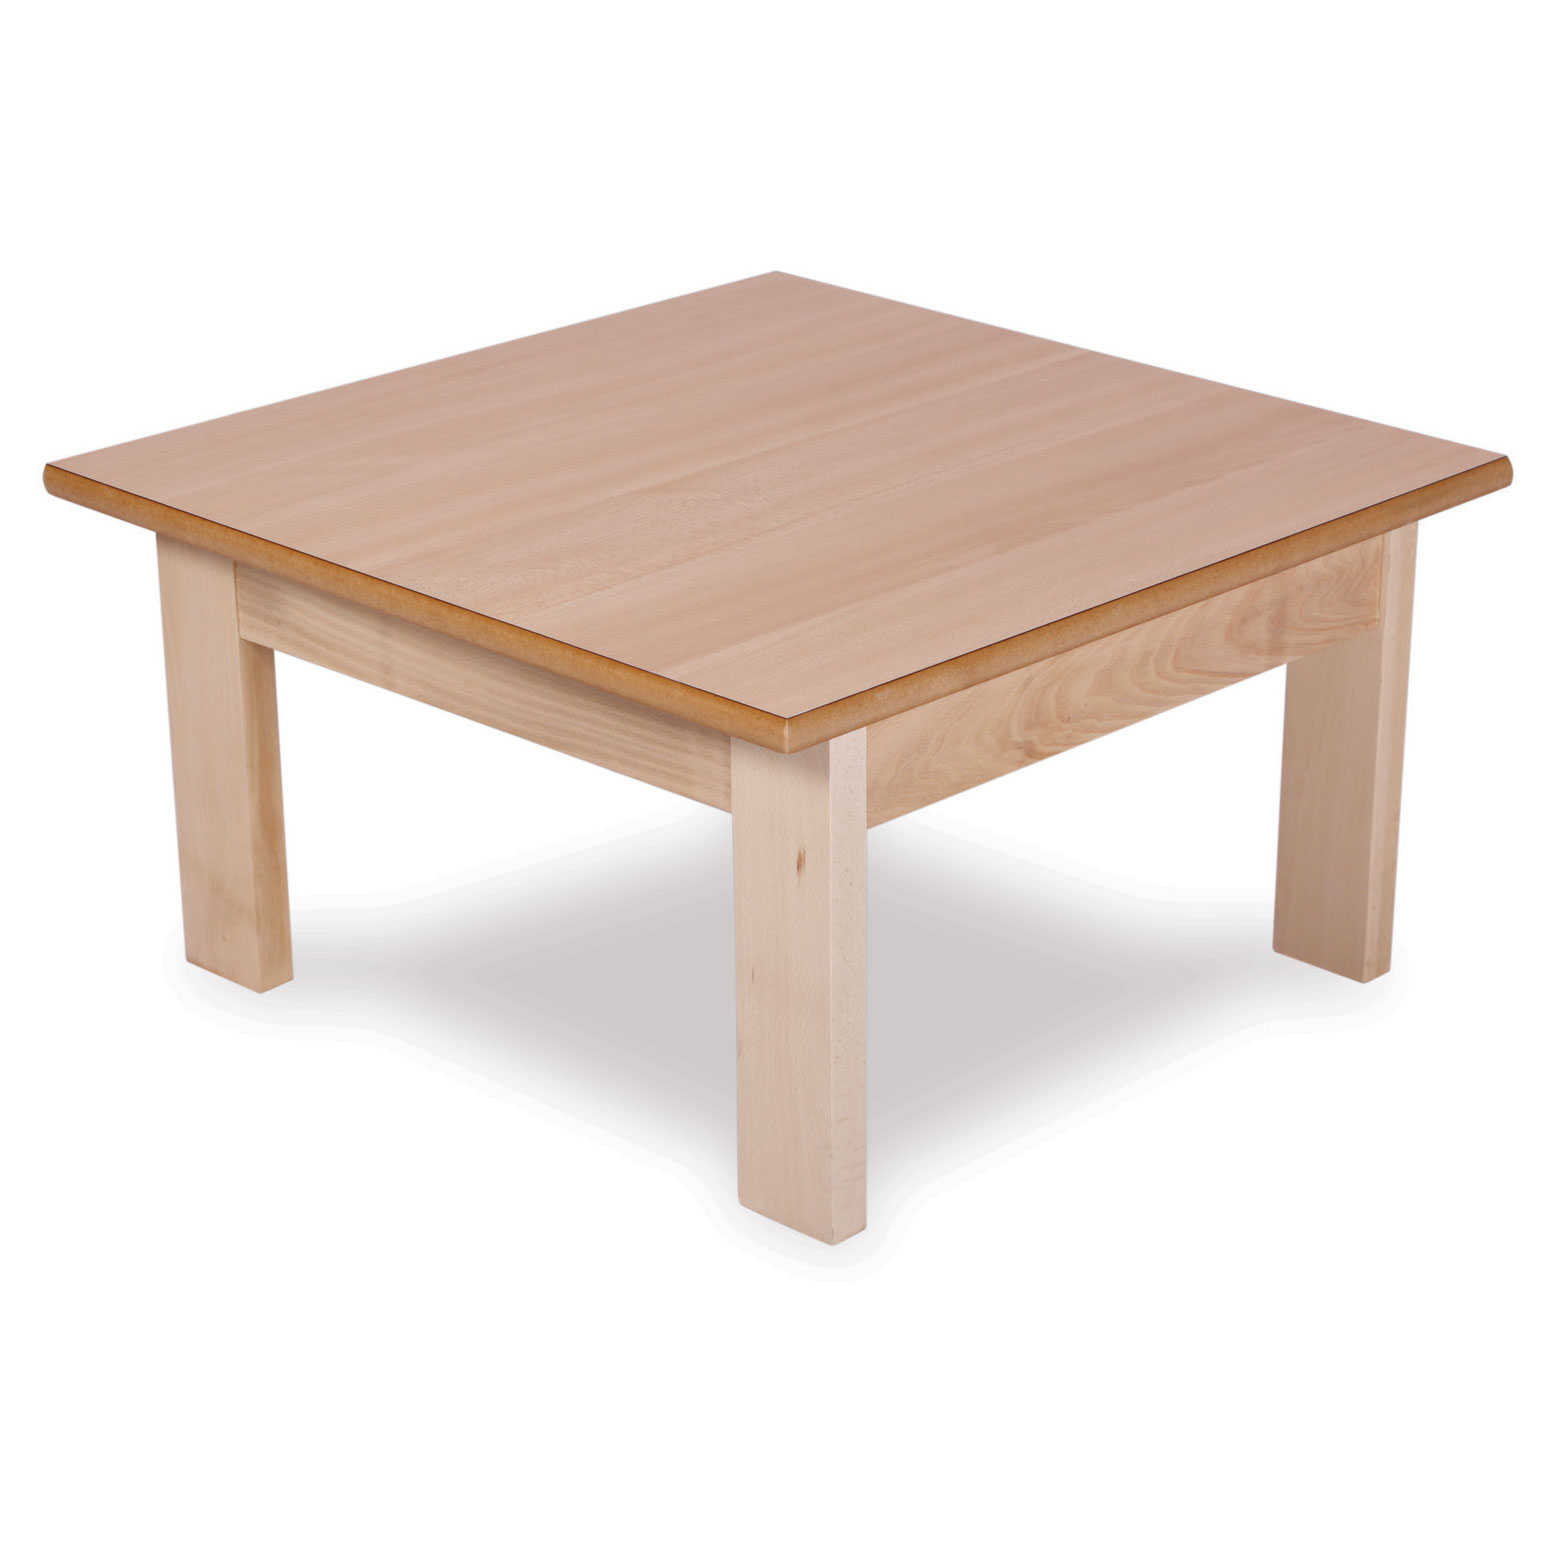 Advanced Square Wooden Coffee Table